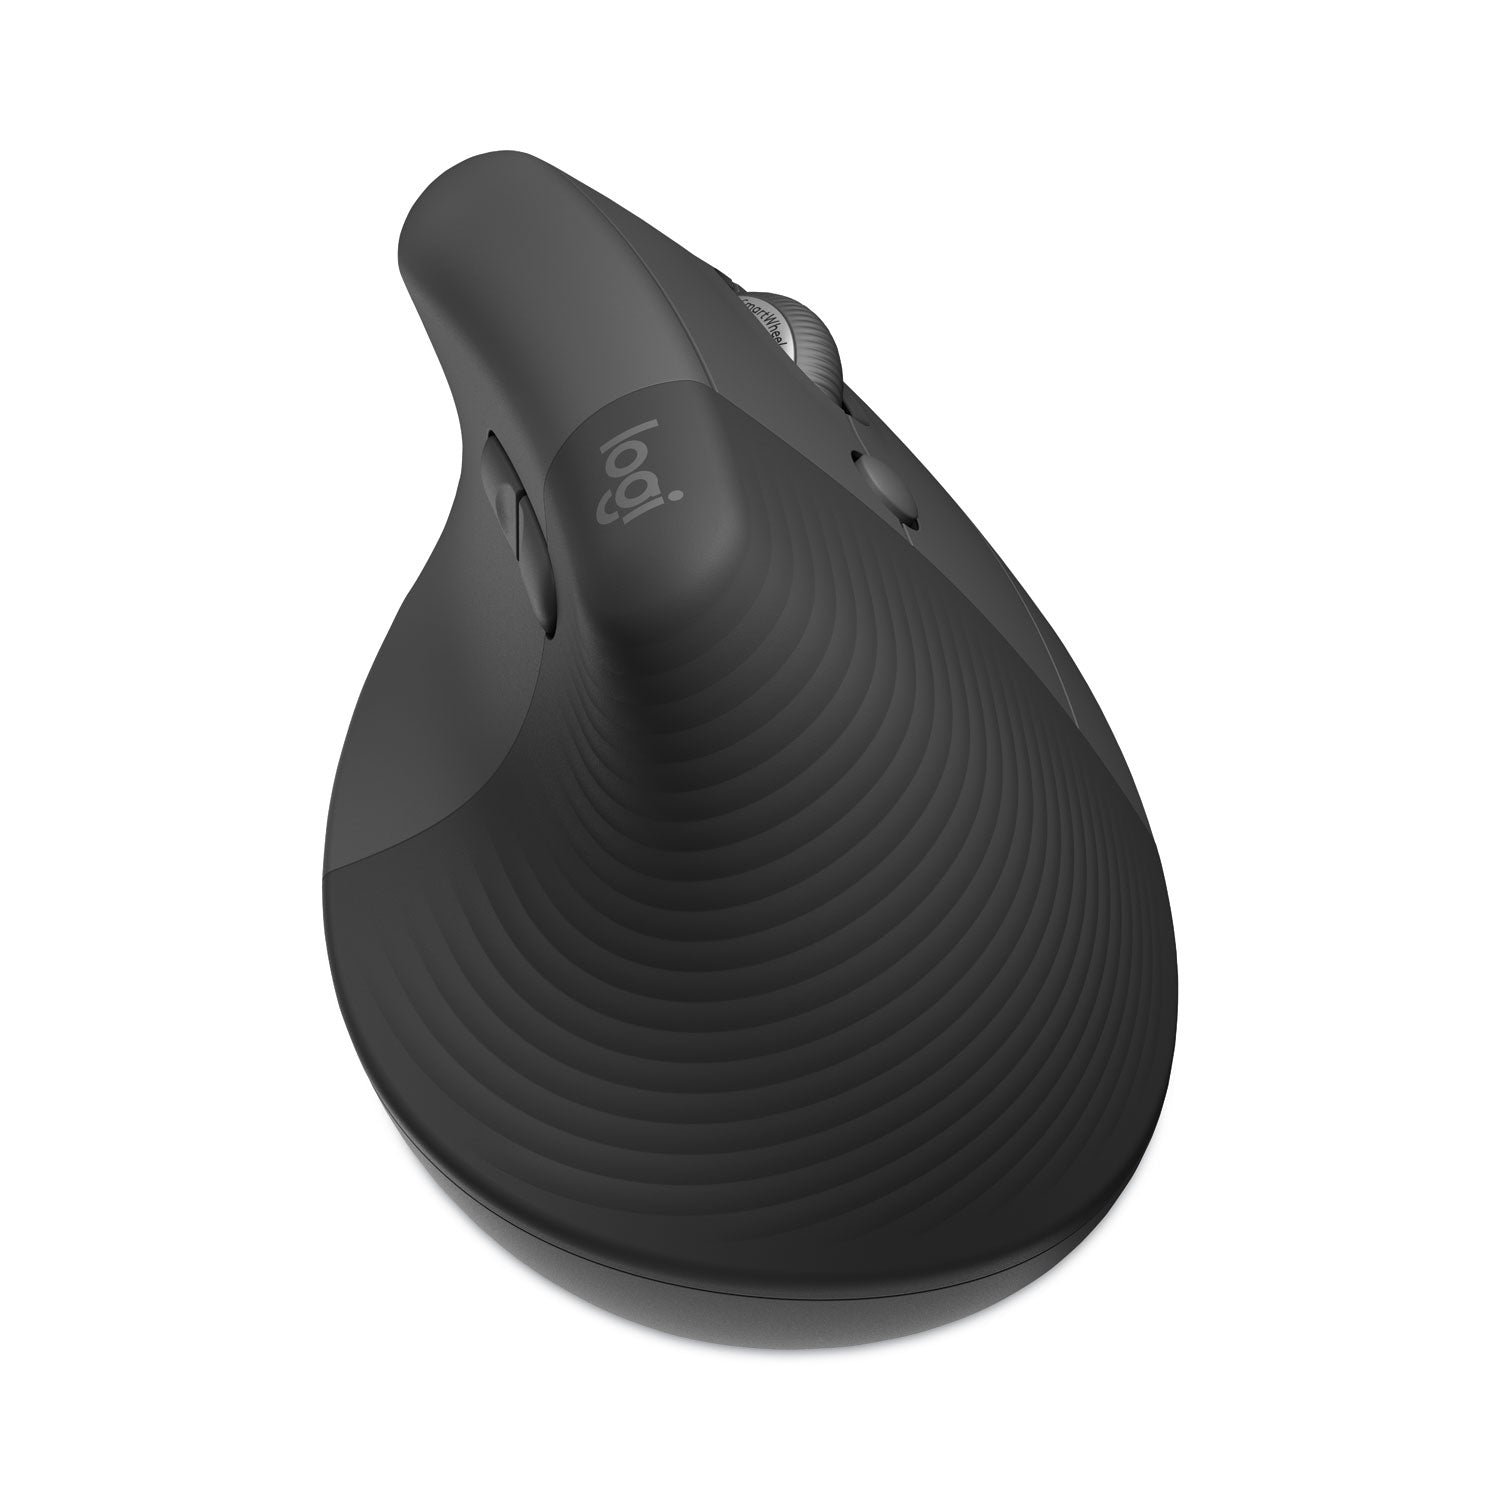 lift-vertical-ergonomic-mouse-24-ghz-frequency-32-ft-wireless-range-right-hand-use-graphite_log910006466 - 6